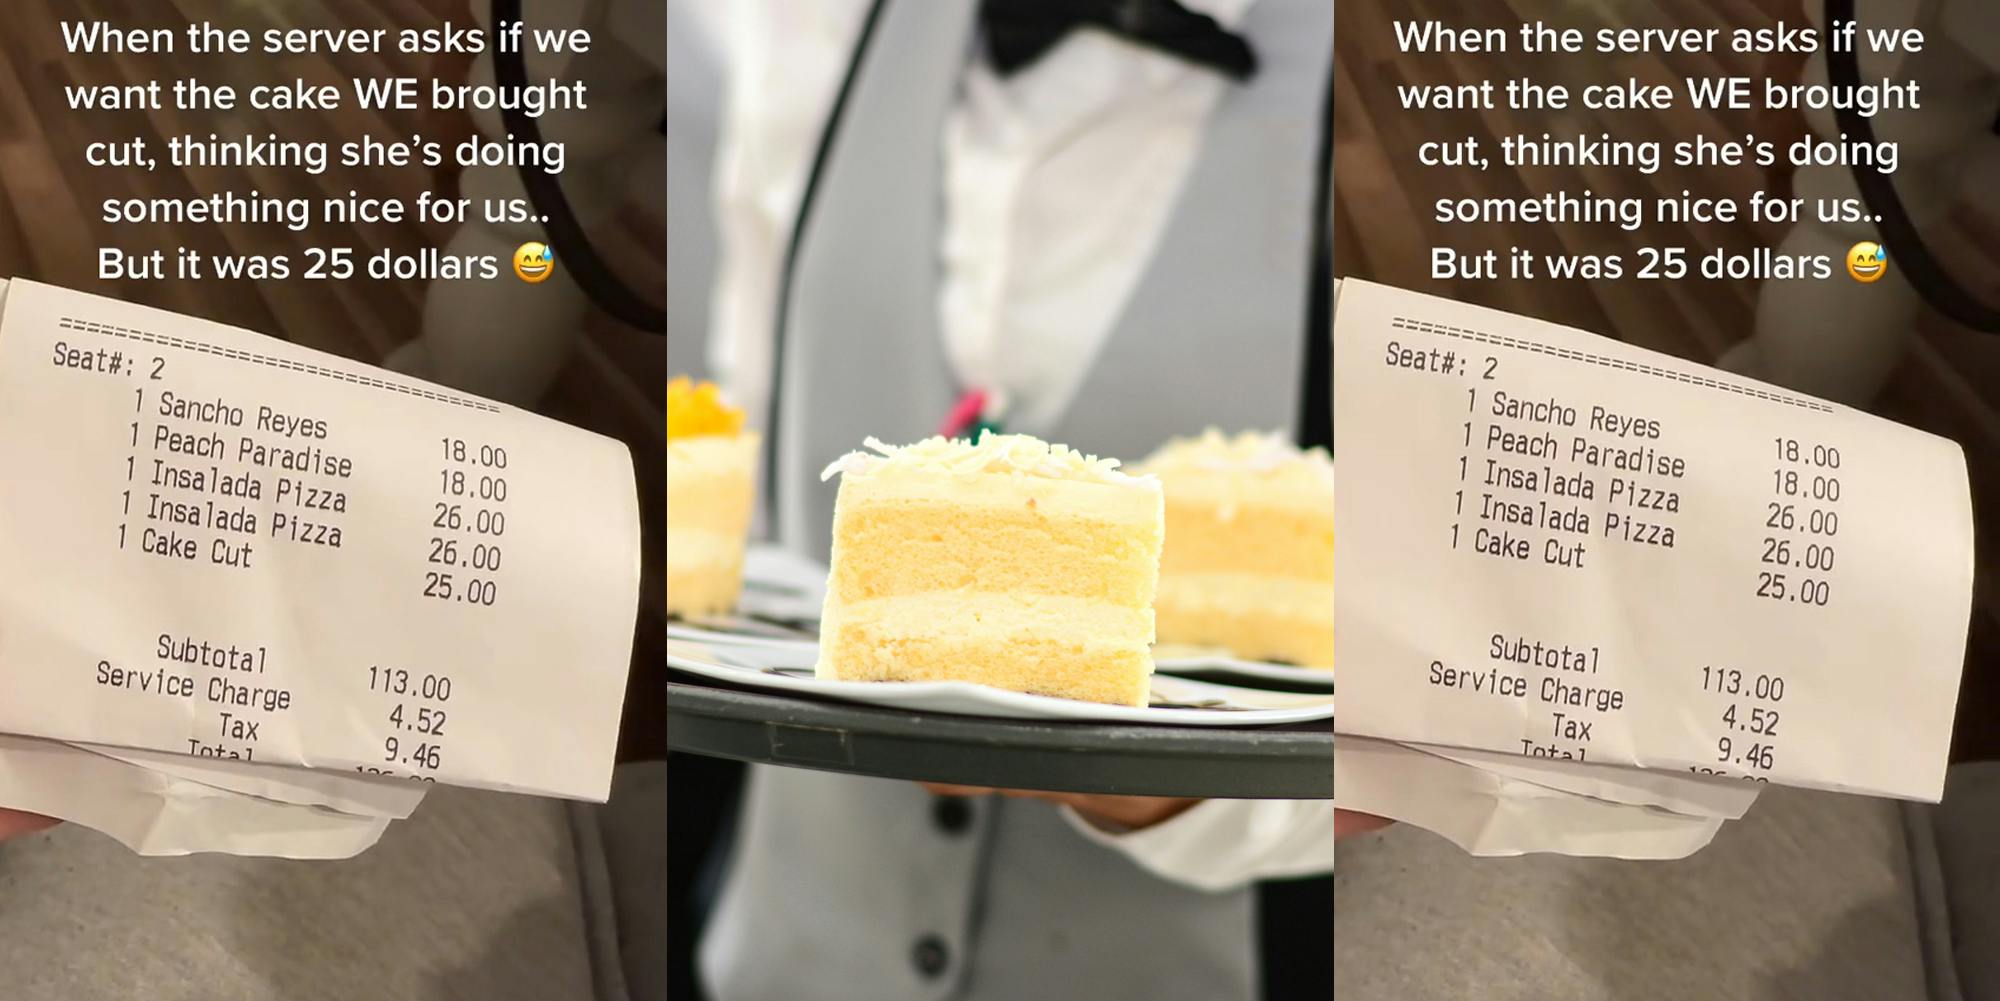 receipt with "1 Cake Cut 25.00" with caption "When the server asks if we want the cake WE brought cut, thinking she's doing something nice for us.. But it was 25 dollars" (l) waiter holding tray with slices of cake (c) receipt with "1 Cake Cut 25.00" with caption "When the server asks if we want the cake WE brought cut, thinking she's doing something nice for us.. But it was 25 dollars" (r)